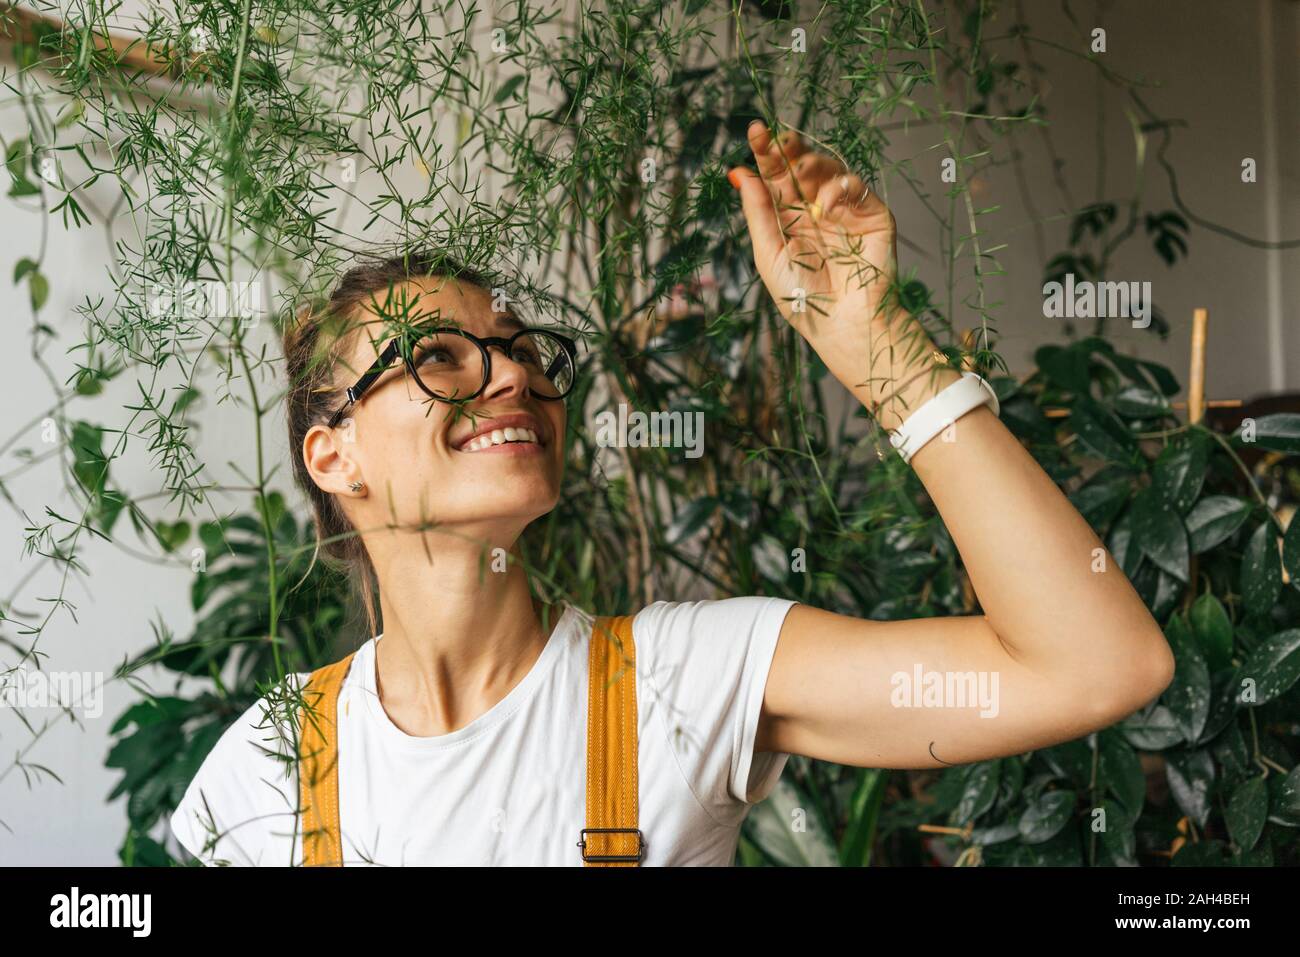 Happy young woman caring for plants Stock Photo